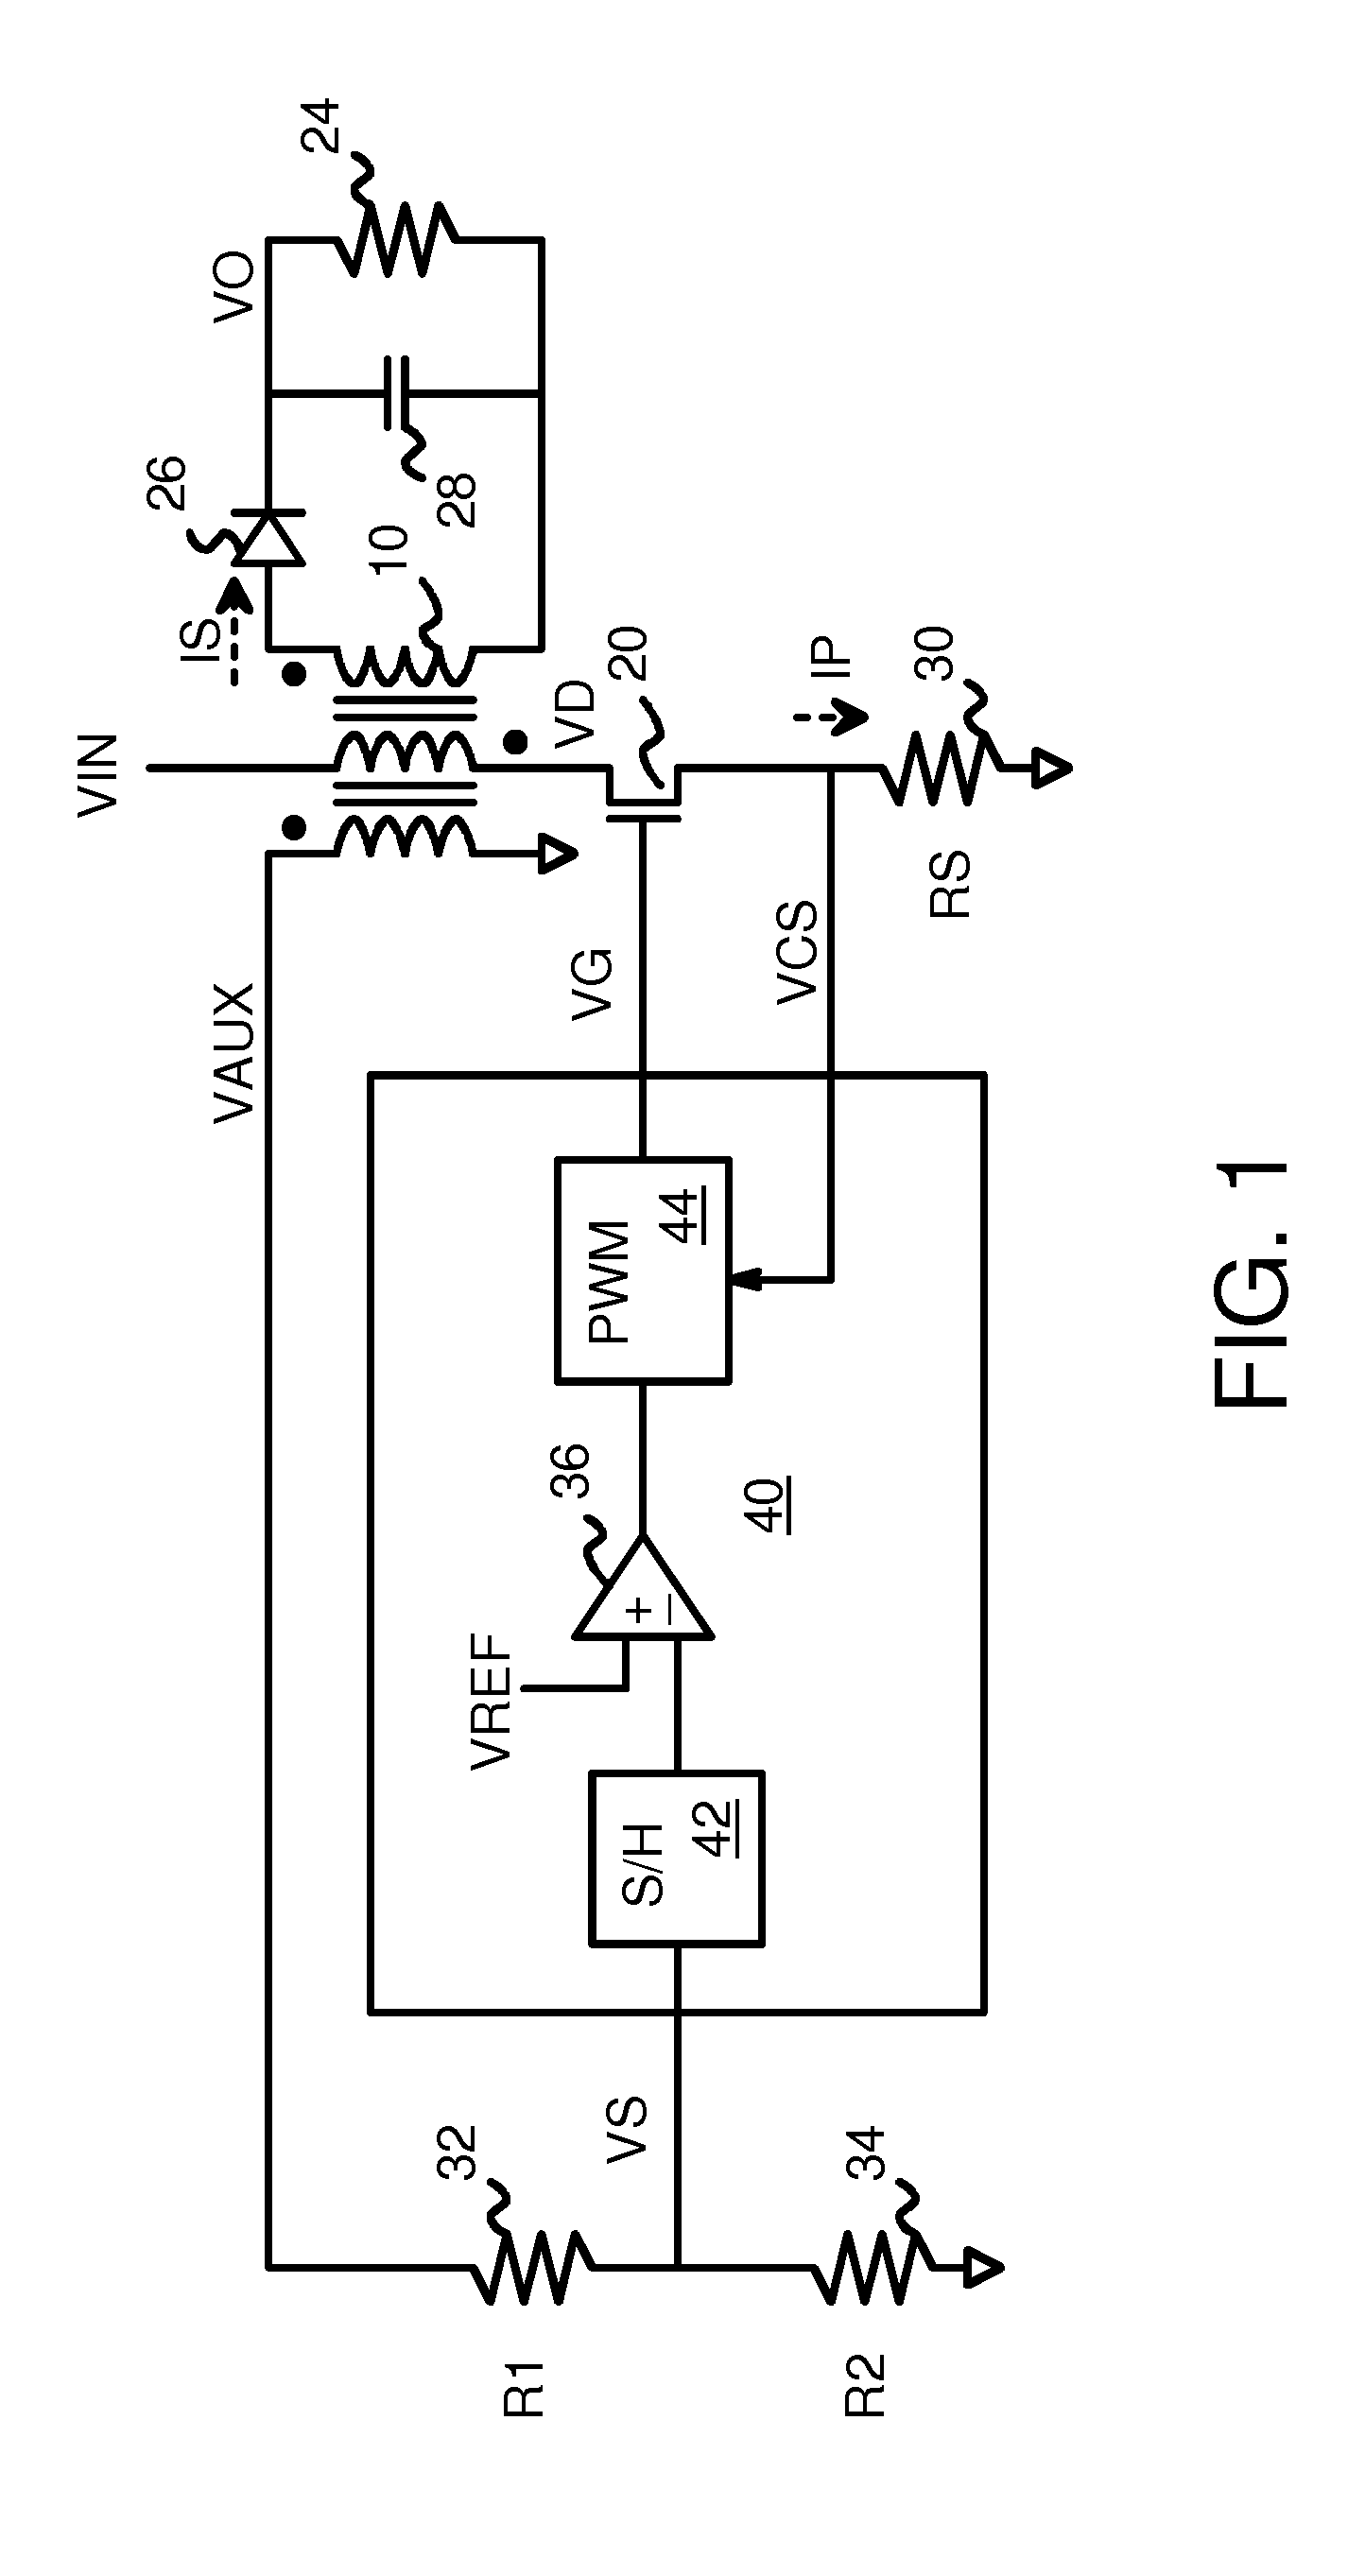 Output Current Estimation for an Isolated Flyback Converter With Variable Switching Frequency Control and Duty Cycle Adjustment for Both PWM and PFM Modes